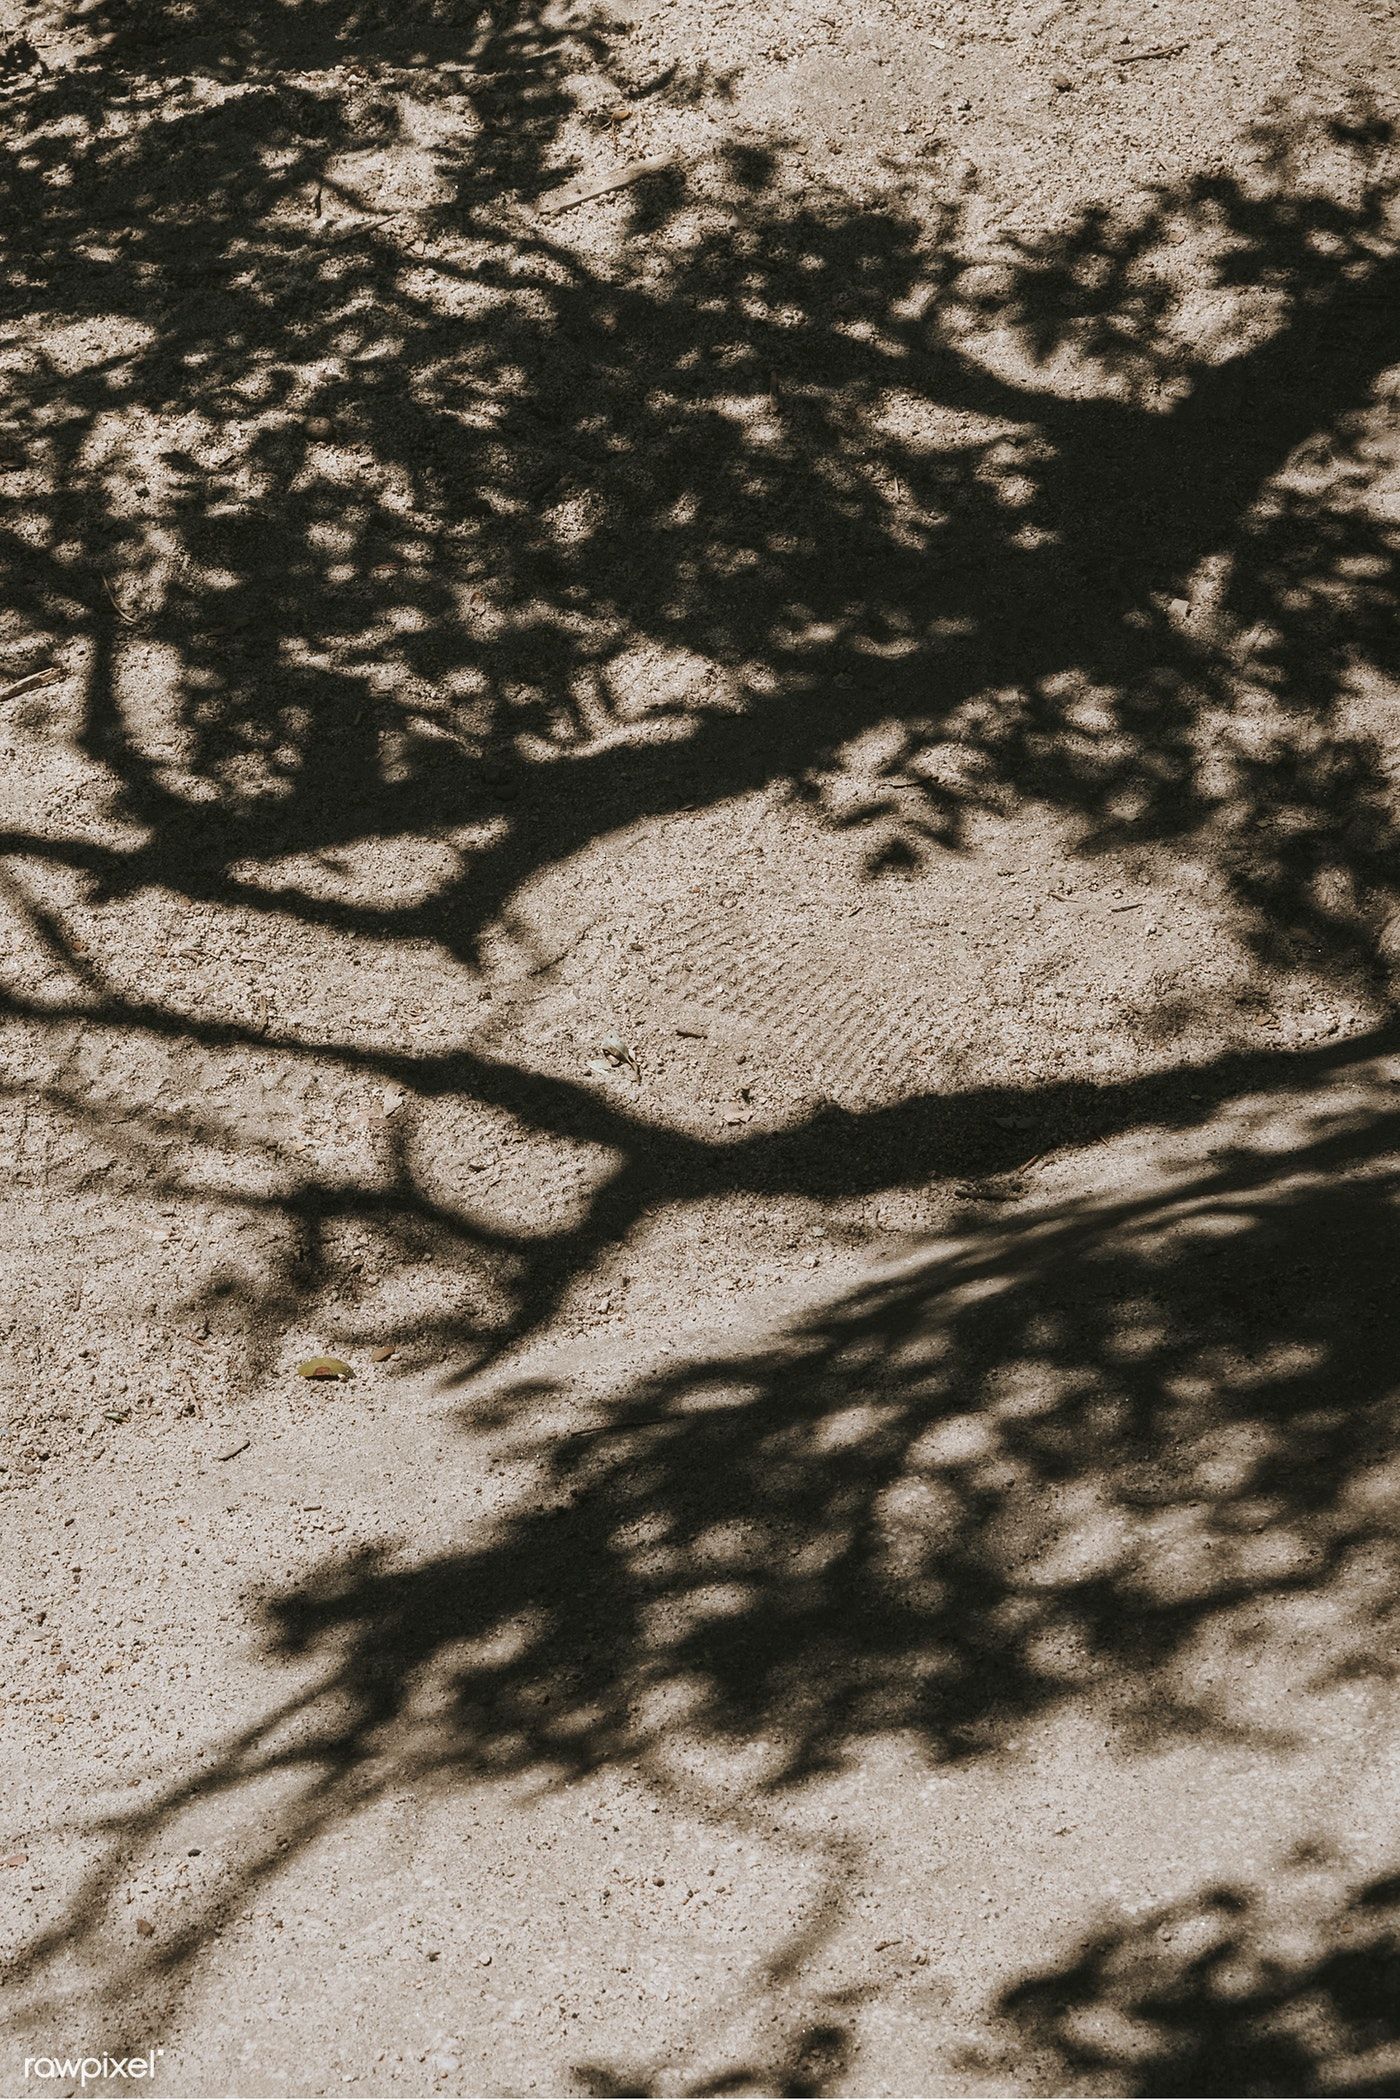 Download free image of Tree shadow on a dirt road by Teddy about tree shadow, tr